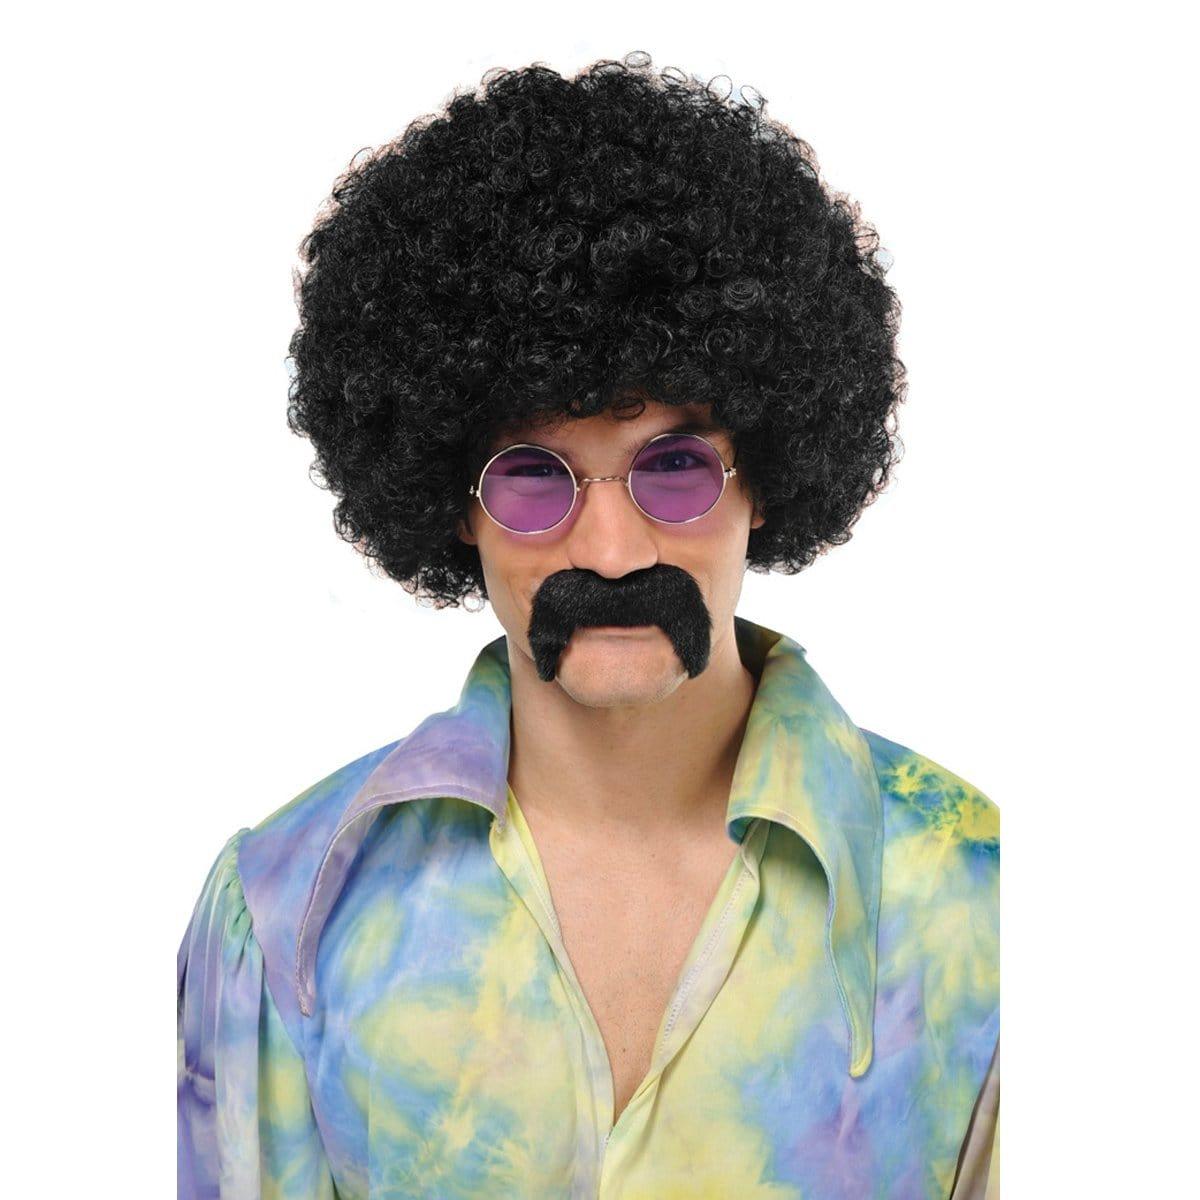 Buy Costume Accessories Black hippie mustache sold at Party Expert